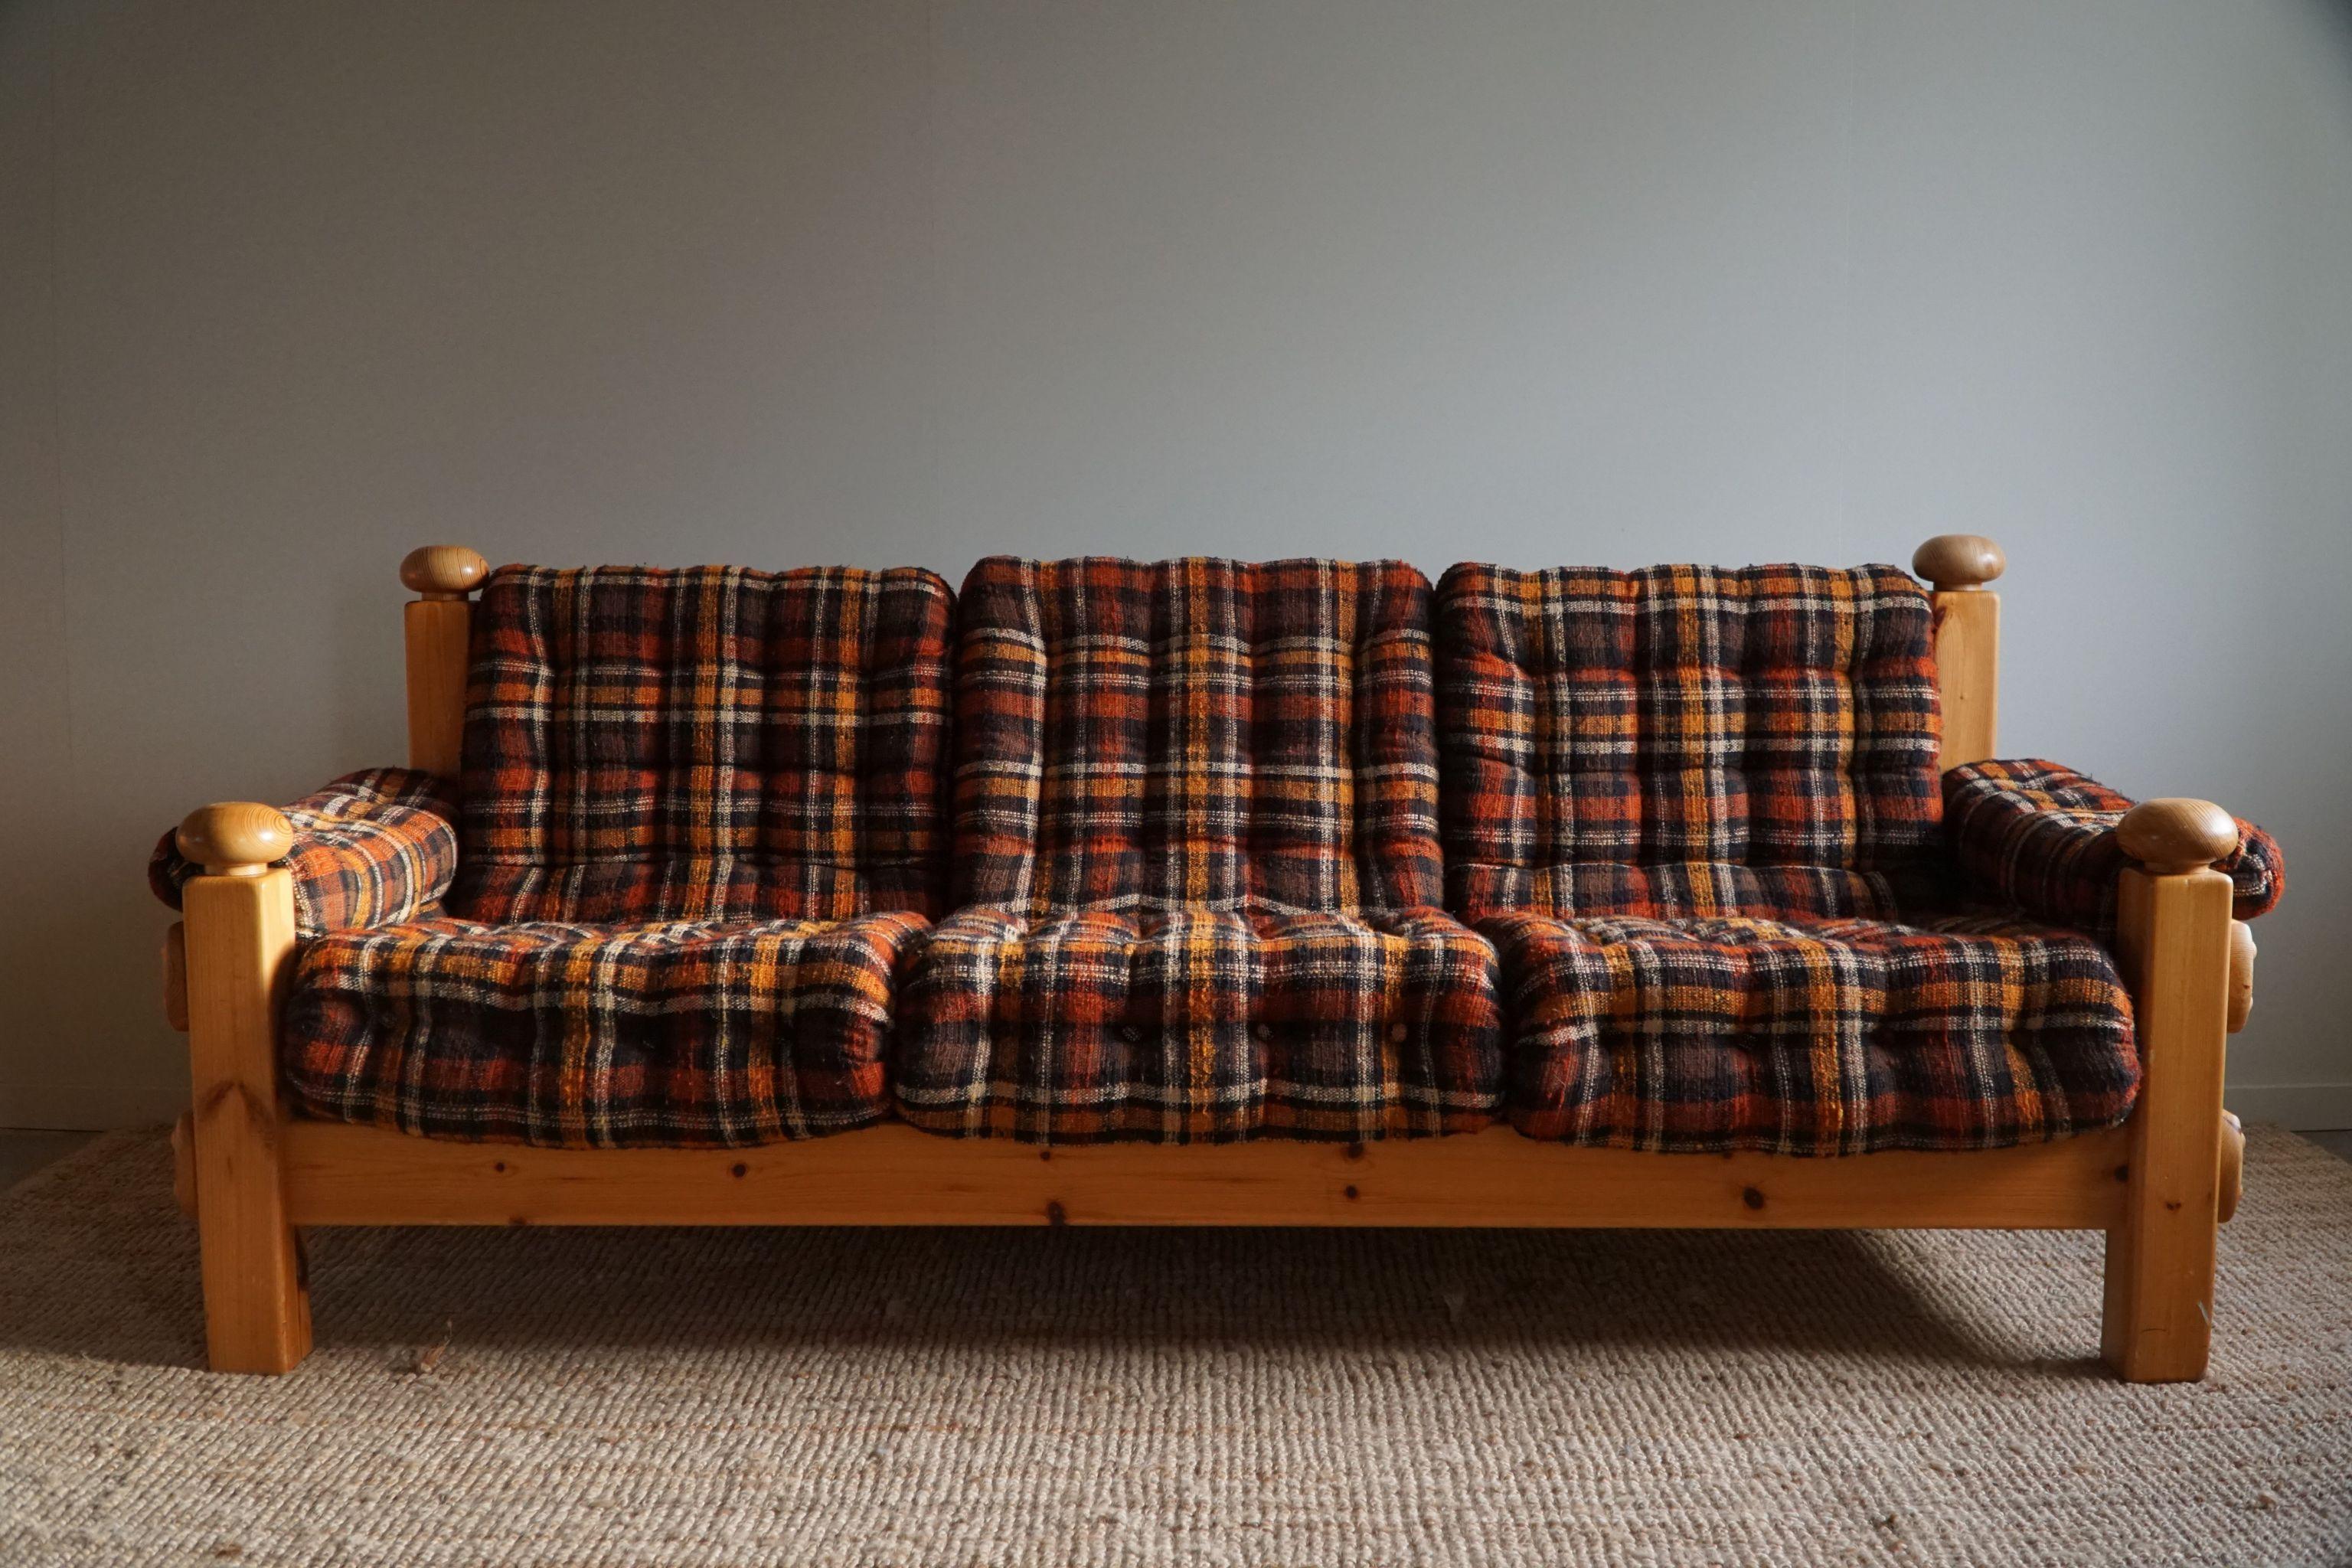 Three Seater Brutalist Sofa in Solid Pine, Swedish Modern, Made in the 1970s For Sale 7